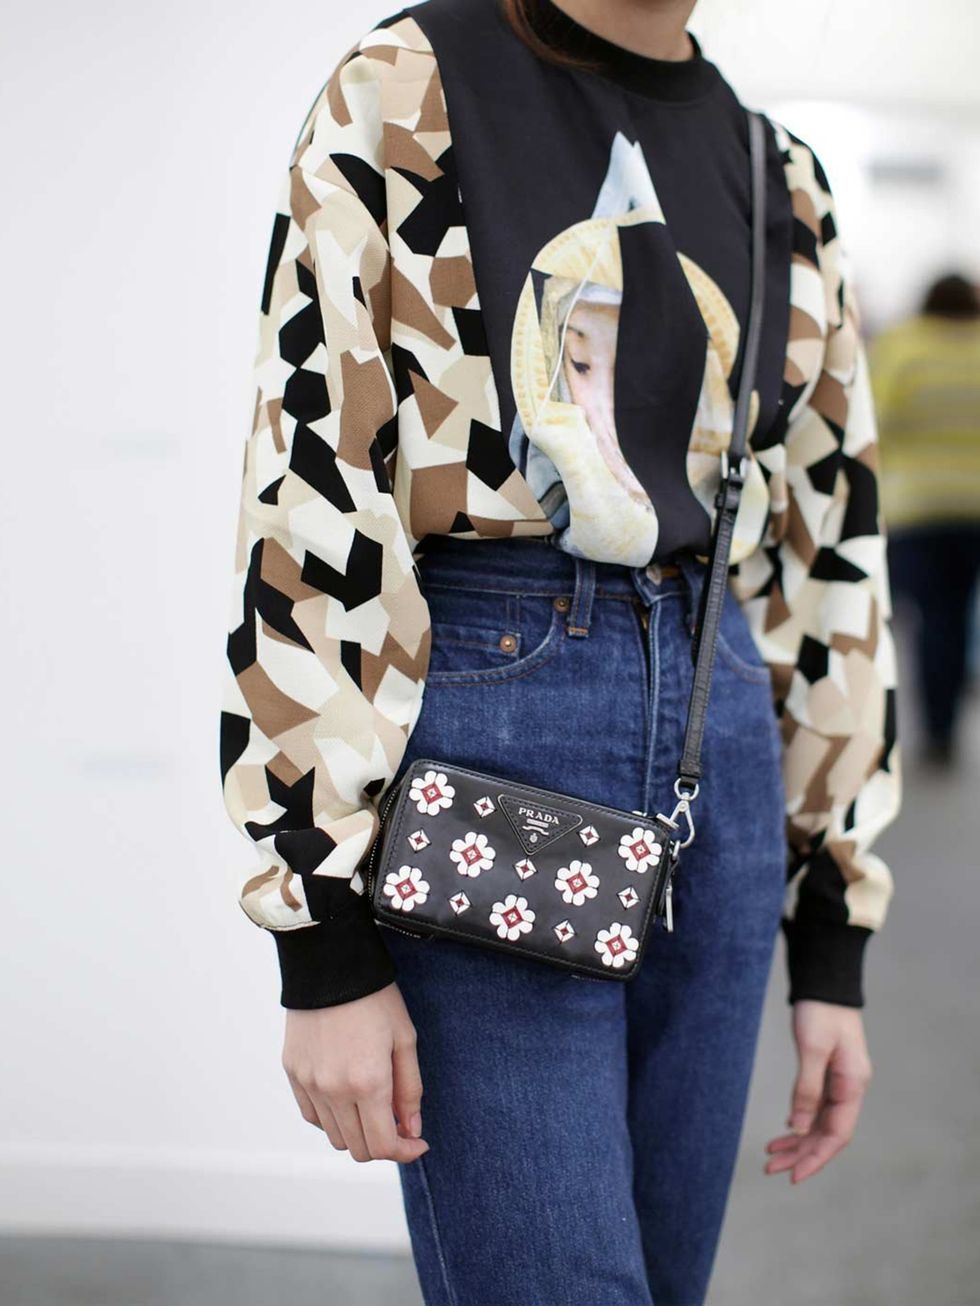 <p>top from a boutique in Thailand; Vintage jeans, Prada bag </p><p><em><a href="http://www.elleuk.com/star-style/red-carpet/frieze-art-london-2013-kate-moss-tracey-emin">See the stars at Frieze</a></em></p><p><em><a href="http://www.elleuk.com/style/stre